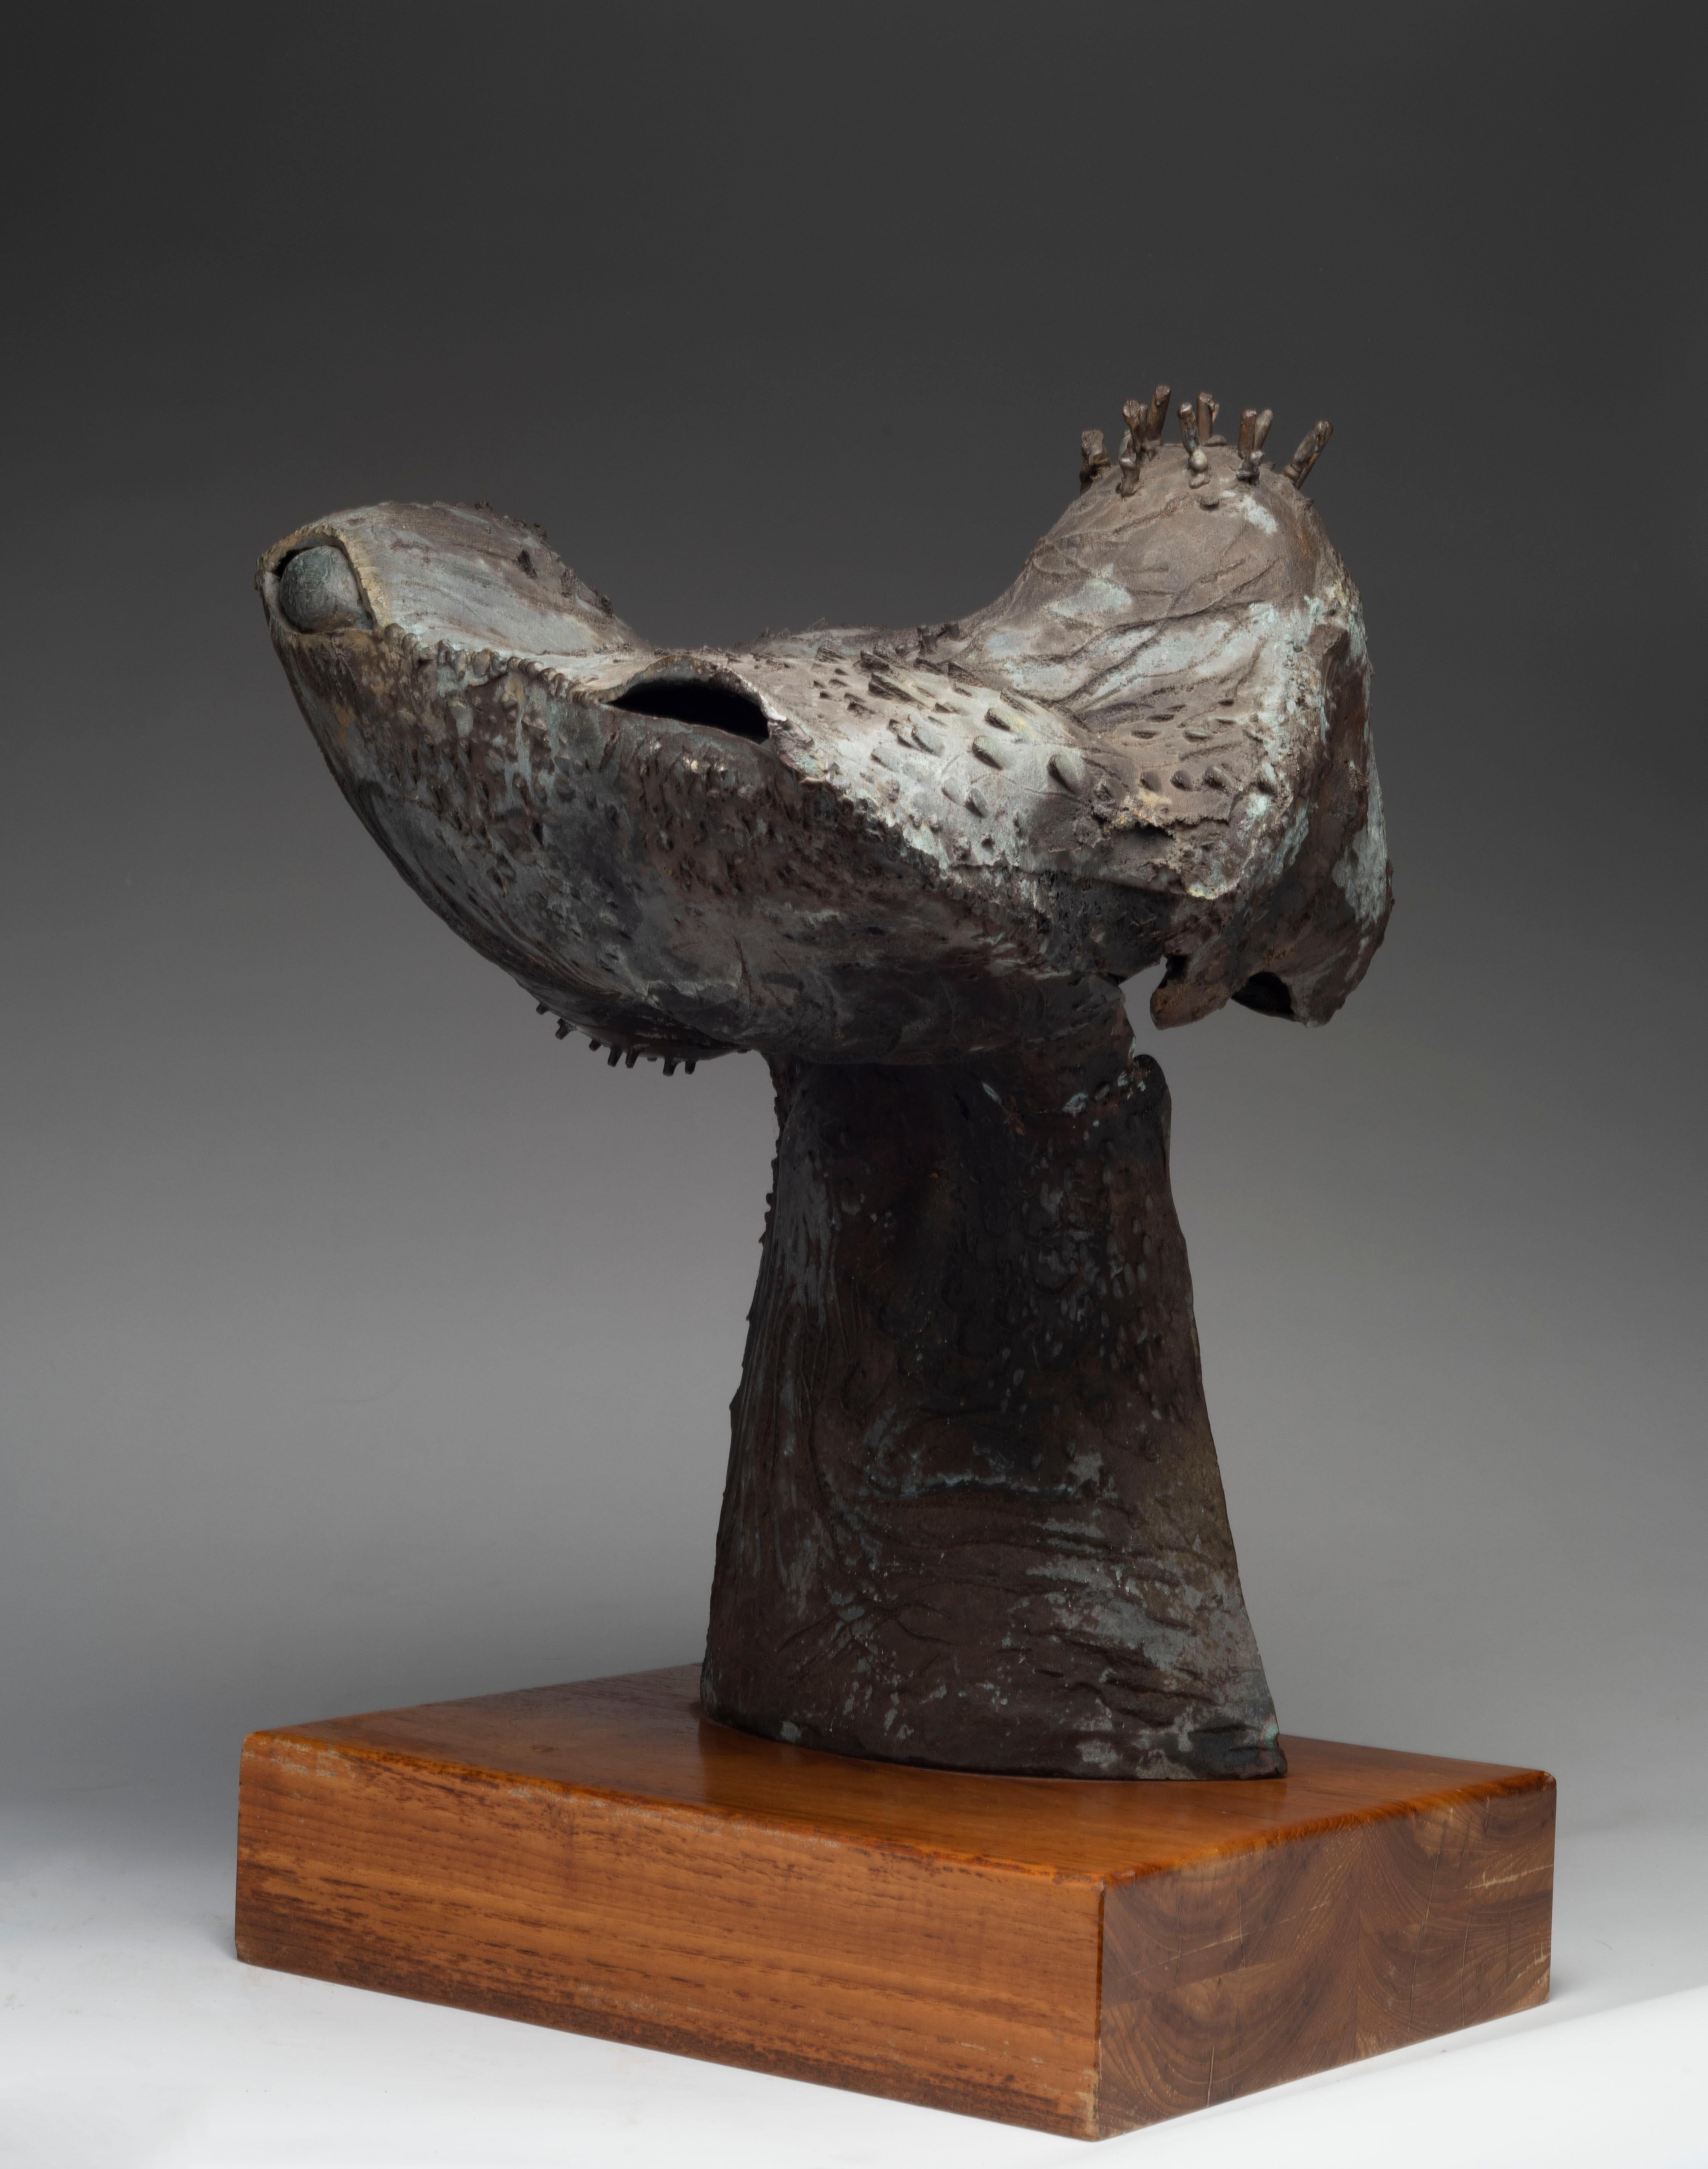 Bronze sculpture by Latin American sculptor Raúl Valdivieso (Chilean, 1931-1993). Valdivieso is known for his reinterpretation of the classic organic forms and human figures. 

Raúl Valdiveso was born September 9, 1931 in Santiago, Chile. In 1952 he